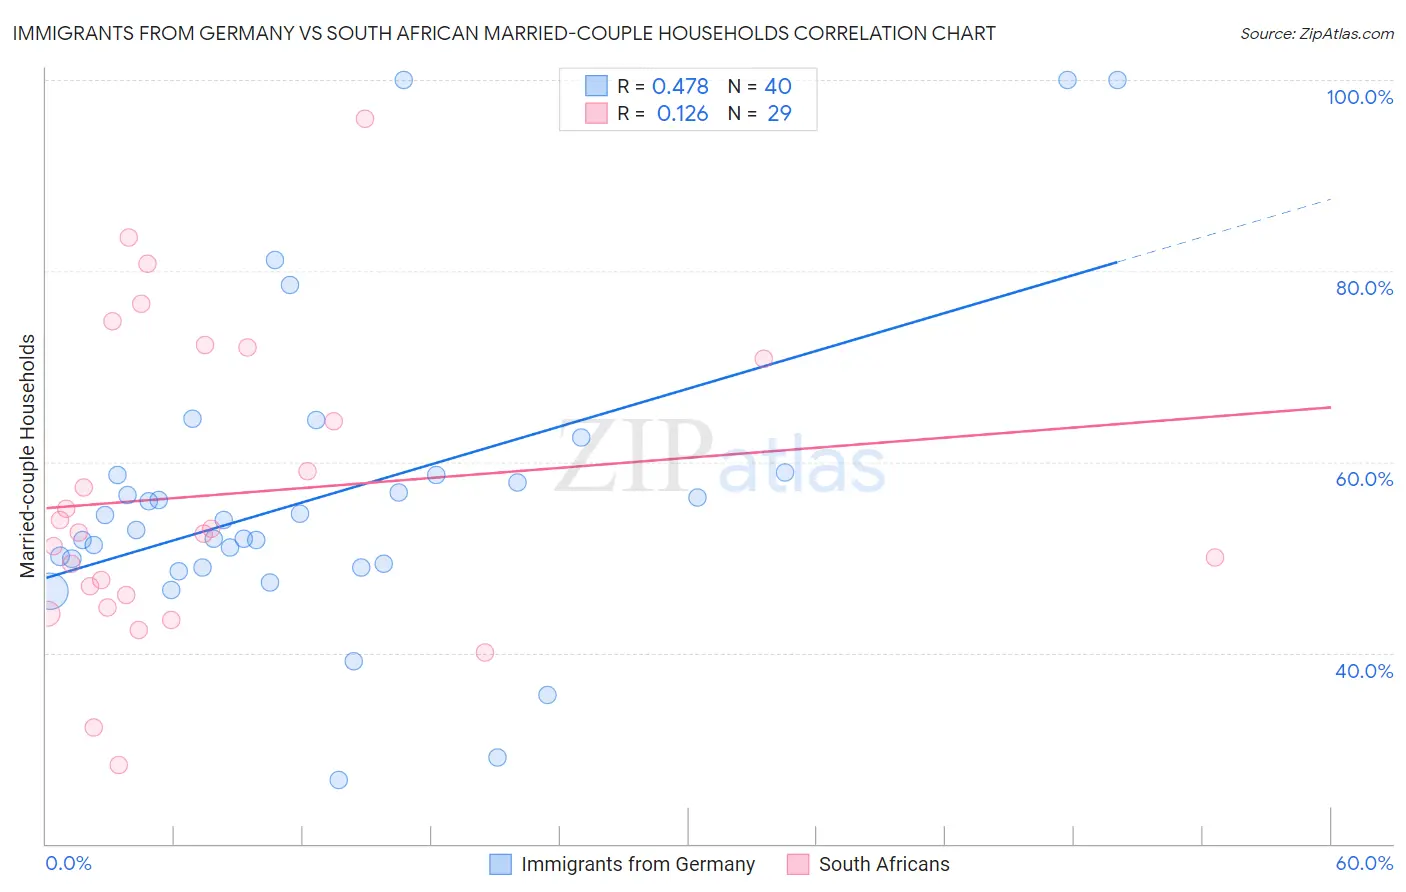 Immigrants from Germany vs South African Married-couple Households